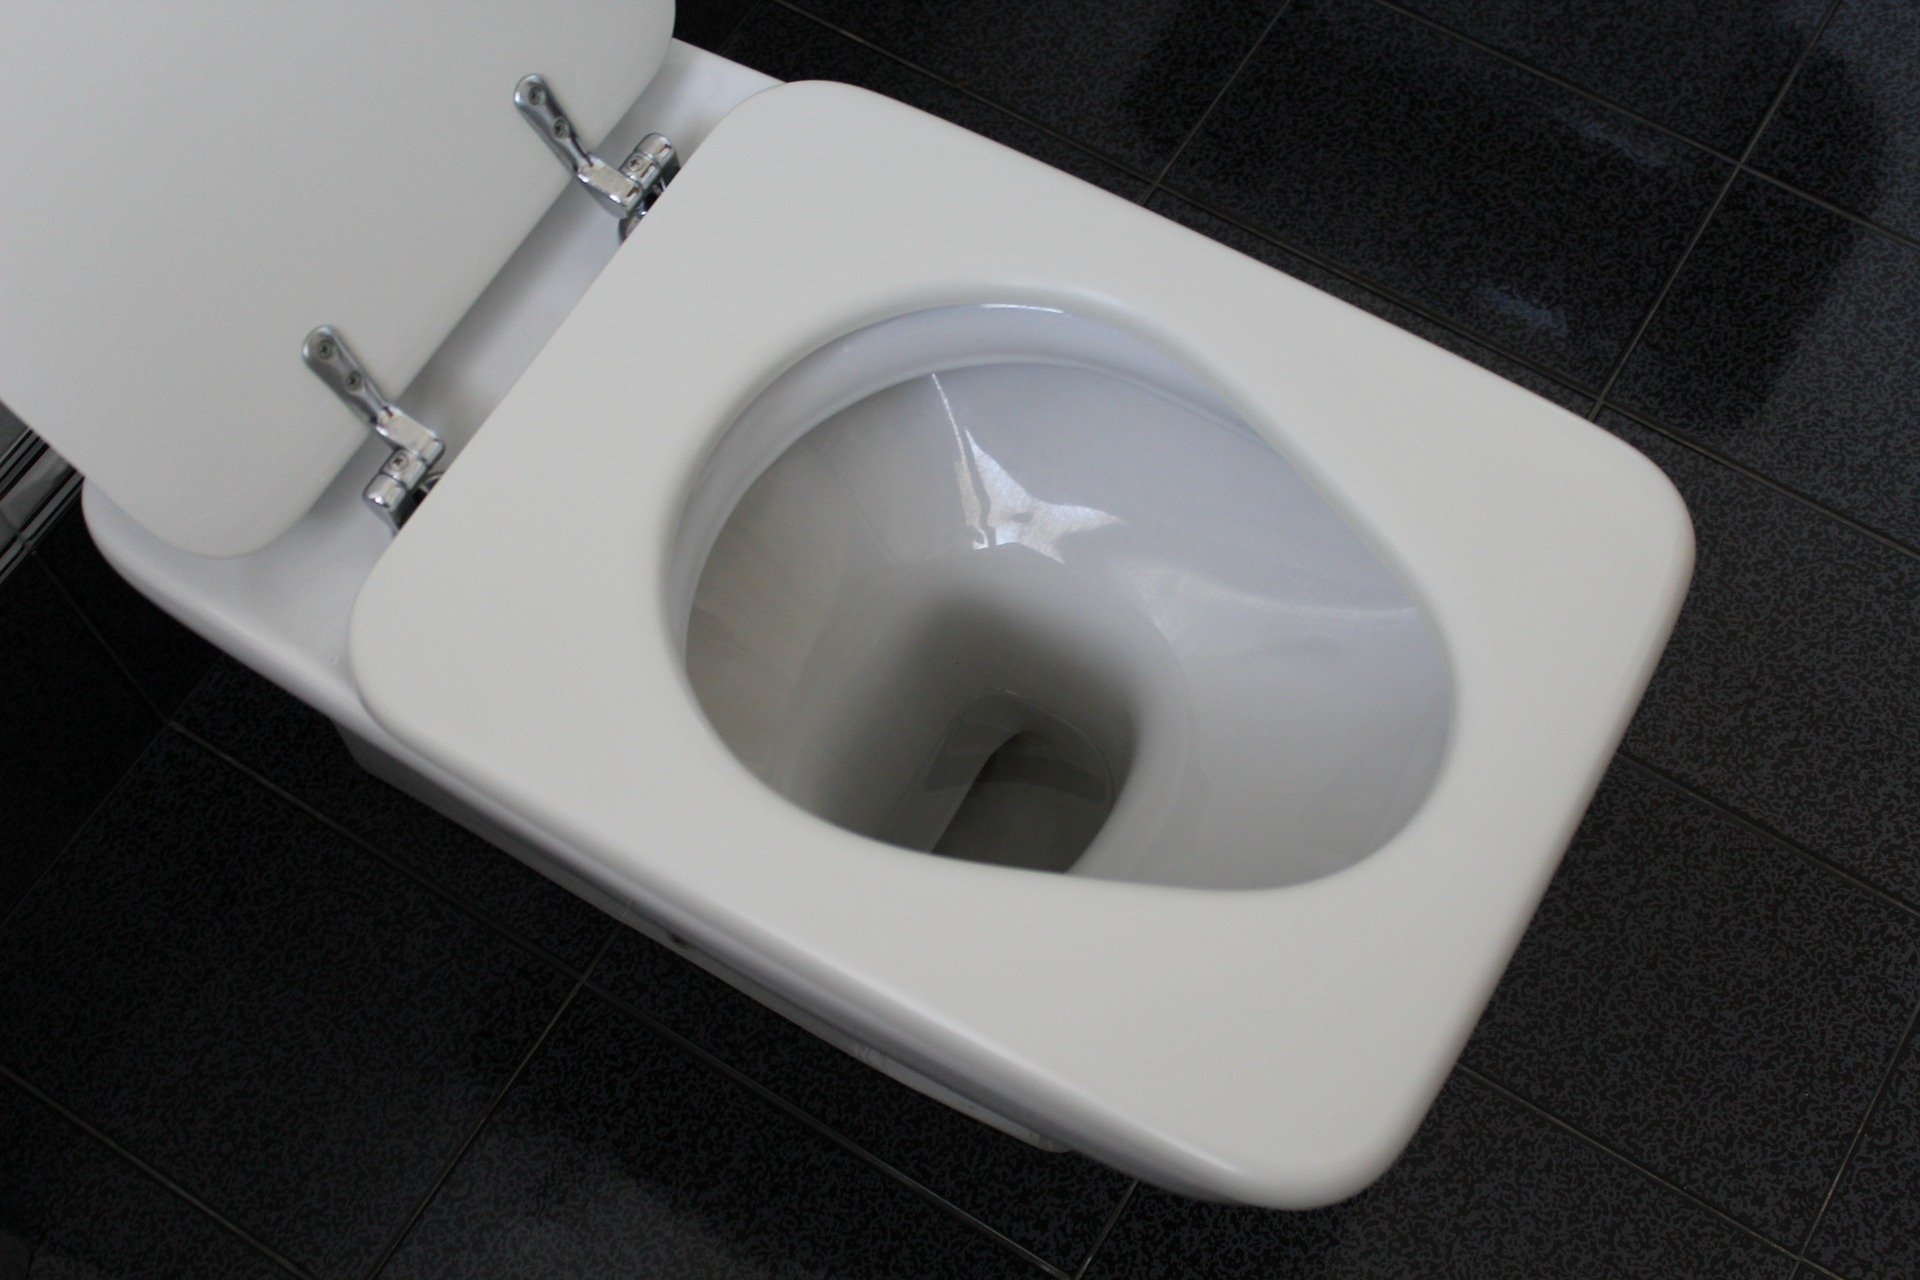 How to Tighten Any Loose Toilet Seat in 10 Minutes - Toilet Haven